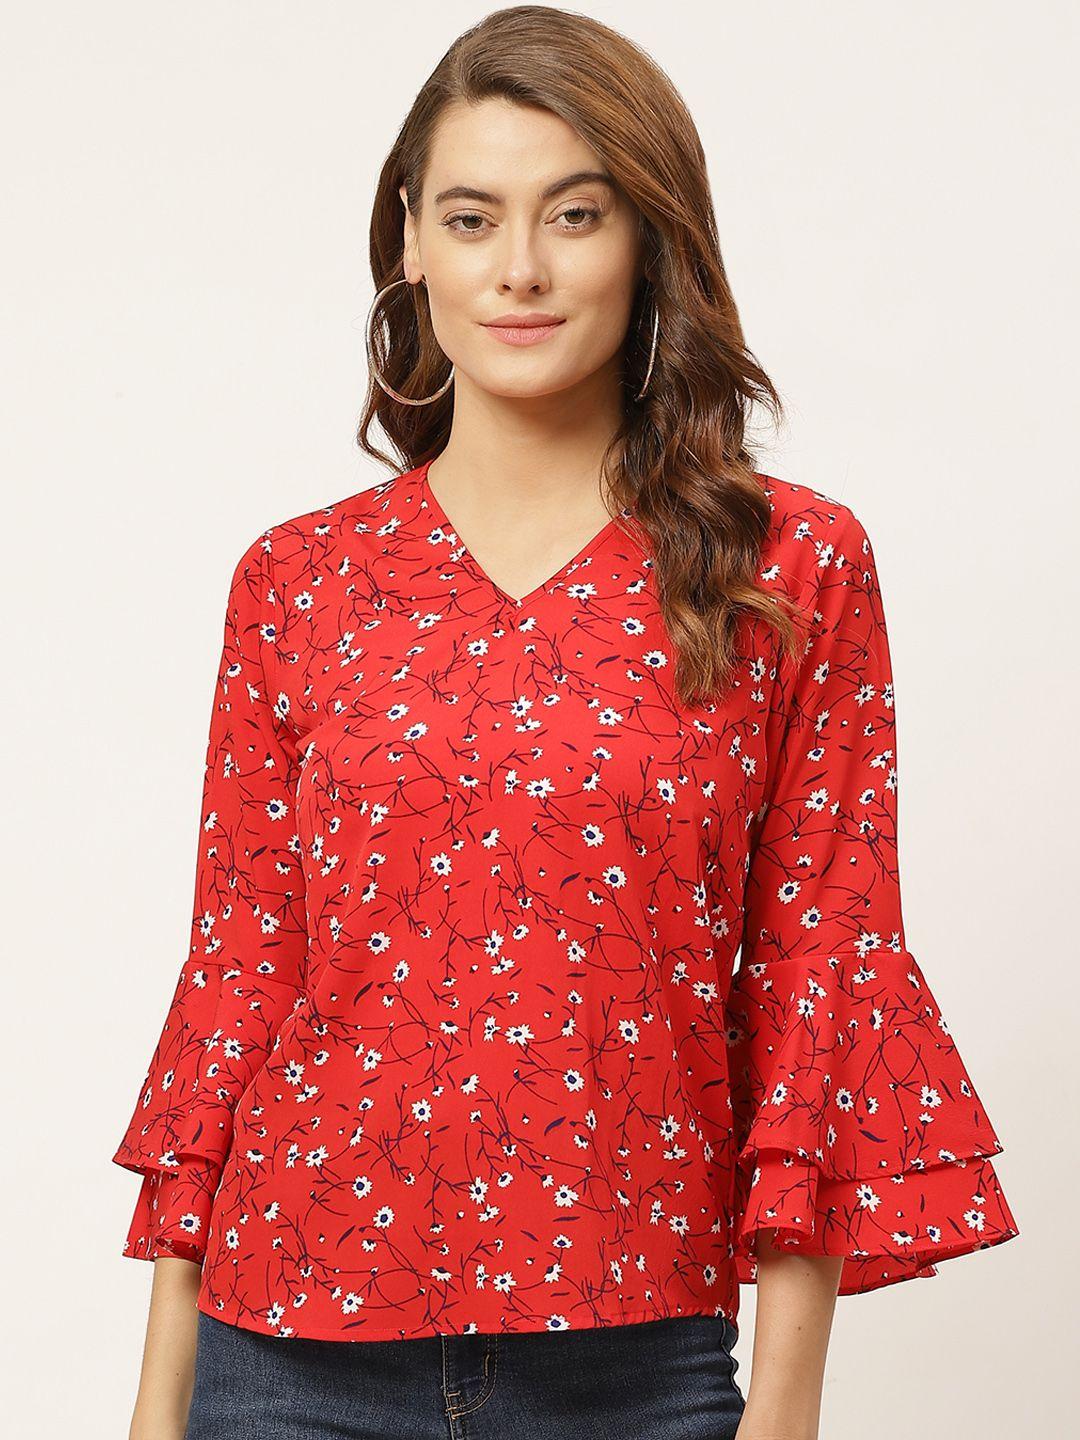 one femme red & white floral printed bell sleeves regular top